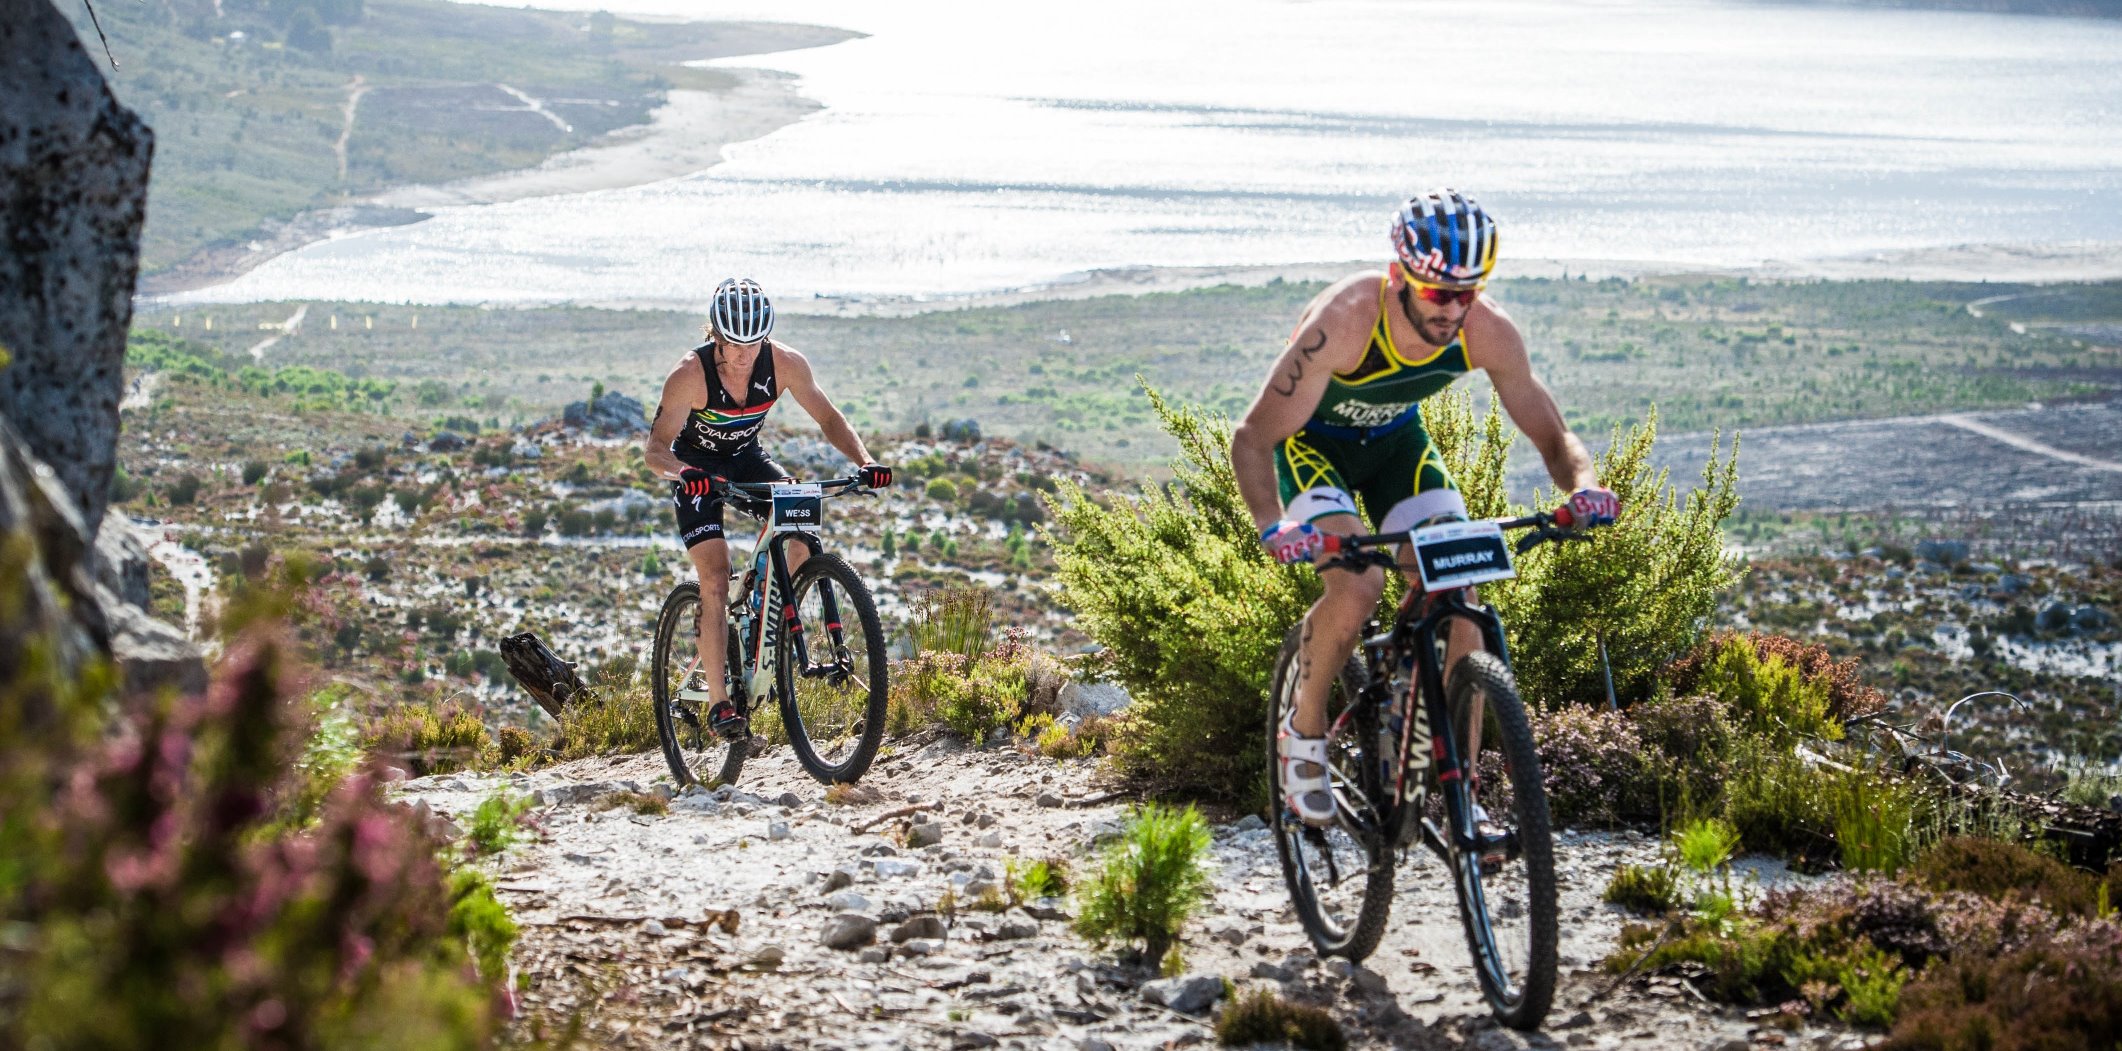 XTERRA SA entries open with an exciting announcement